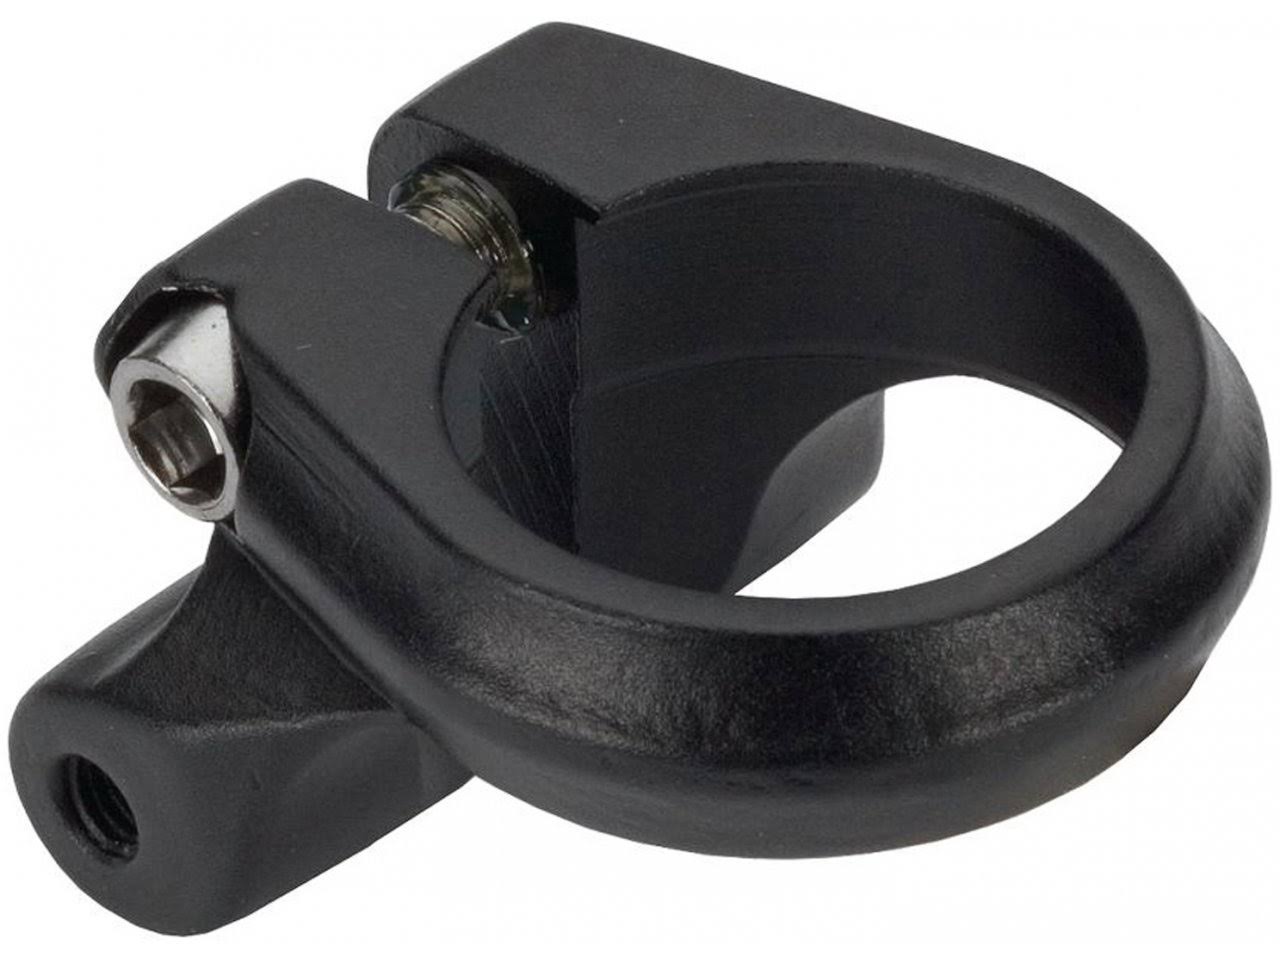 Problem Solvers Seatpost Clamp 31.8 with Rack Mounts - Black